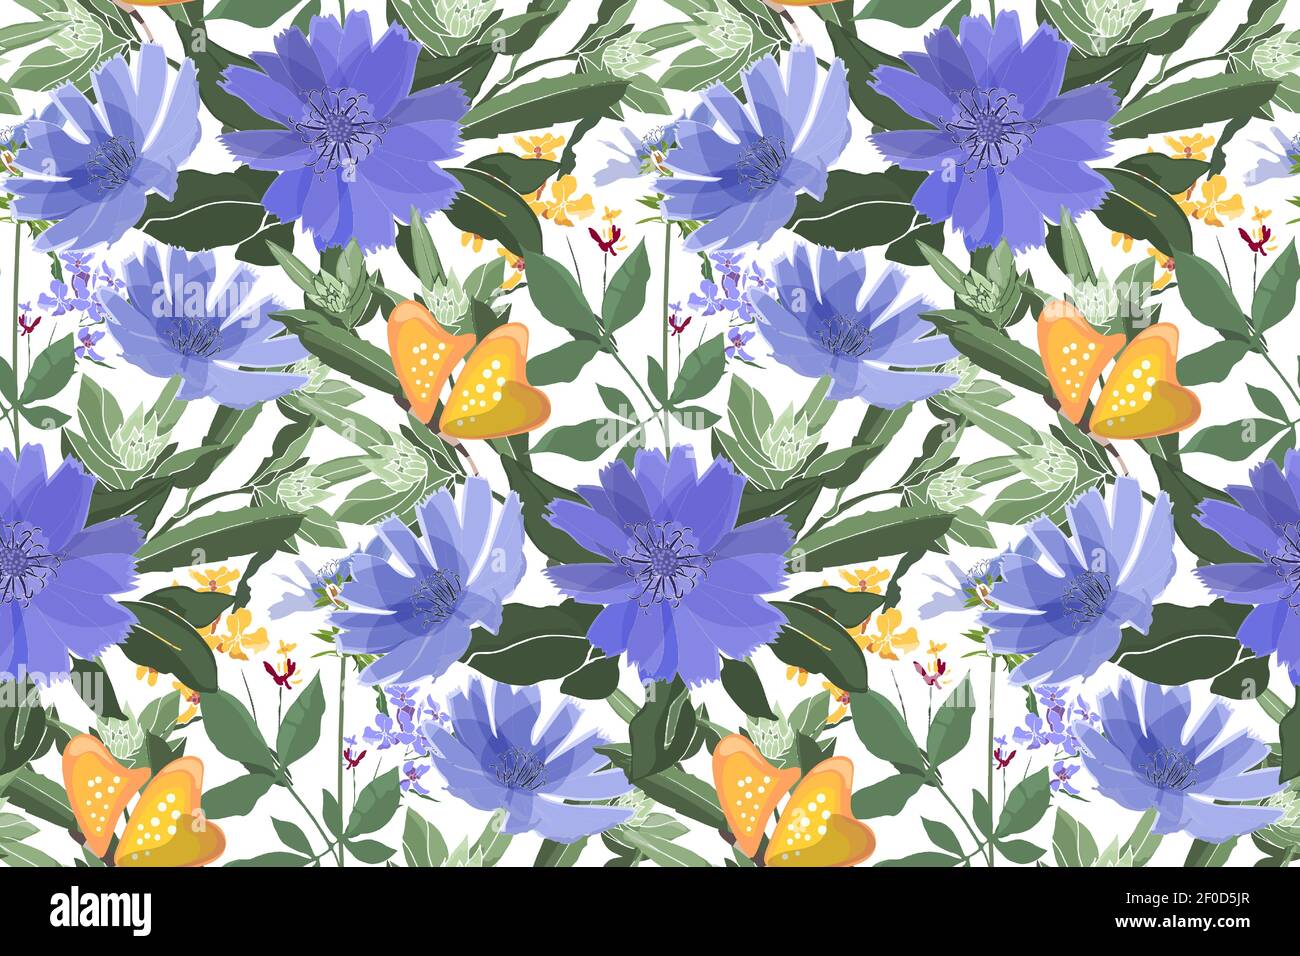 Vector floral seamless pattern. Blue chicory, yellow butterflies. Stock Vector